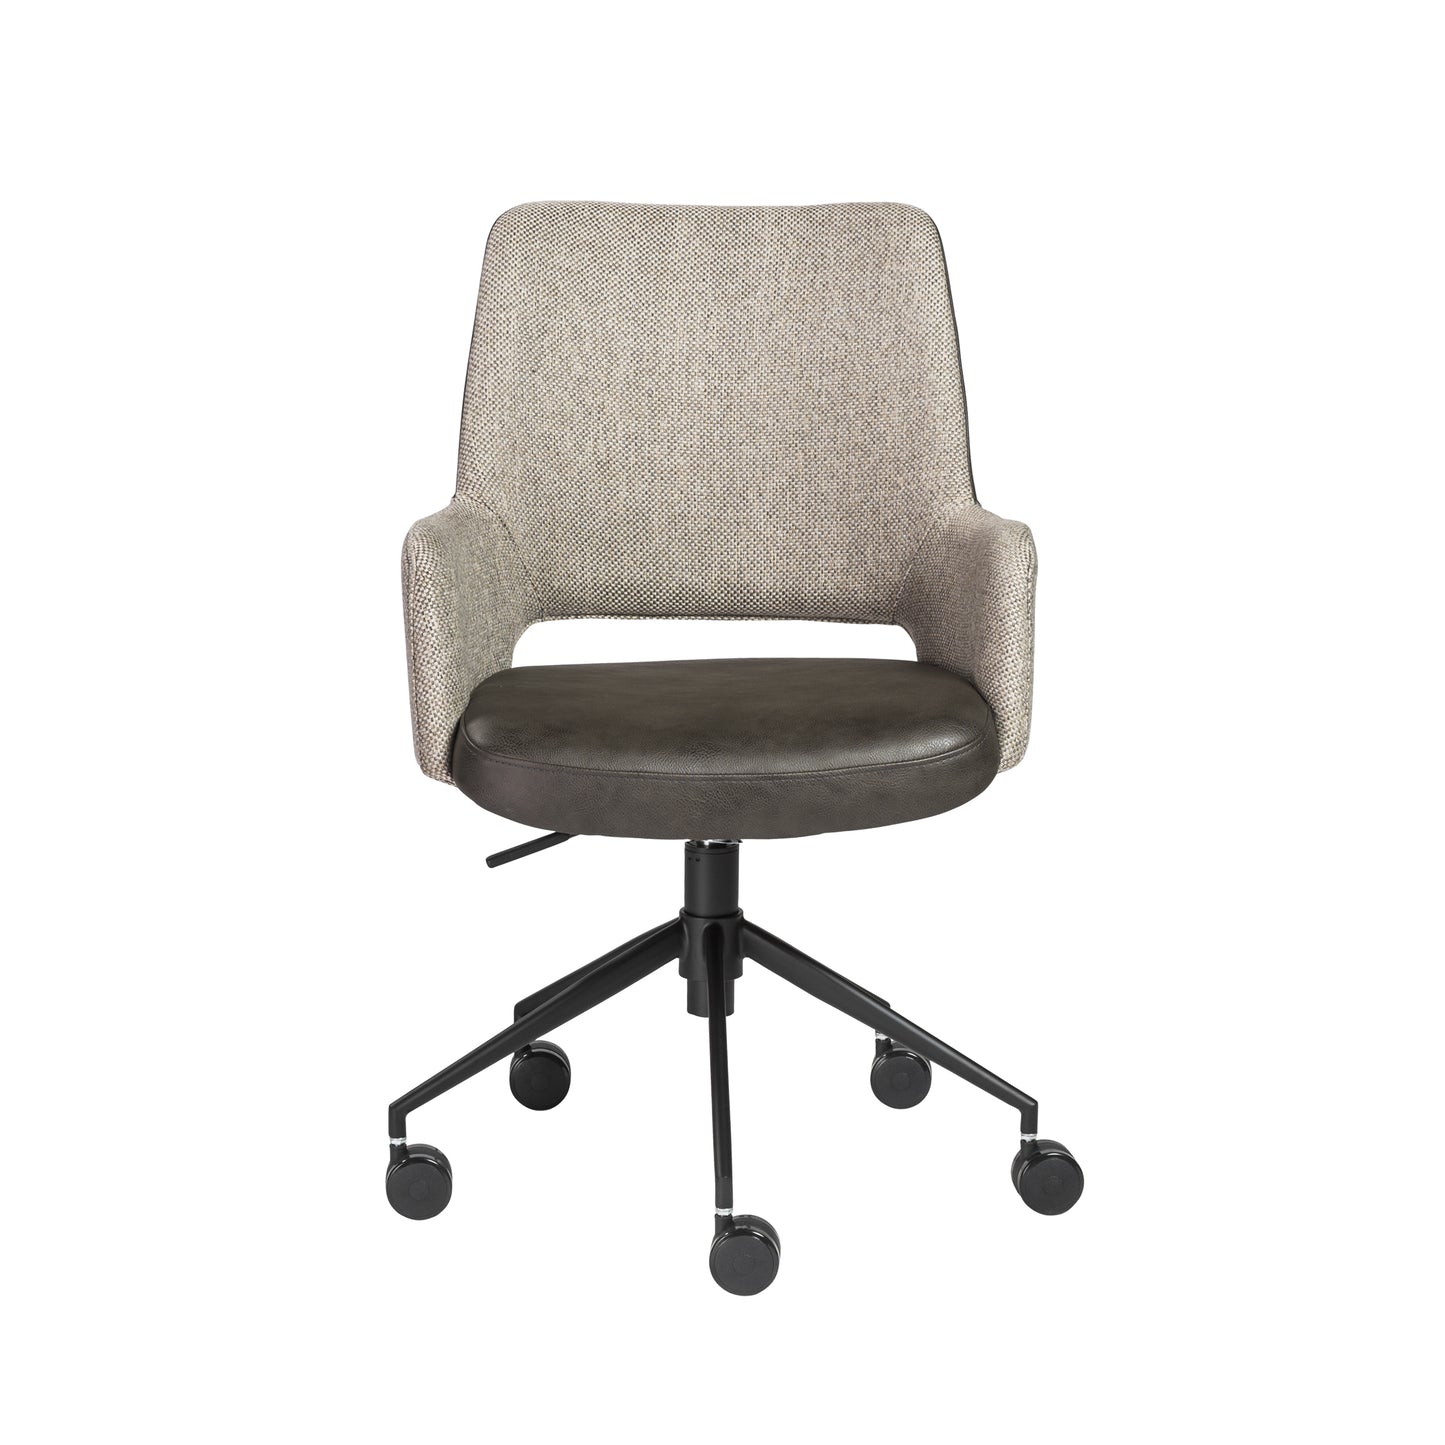 Load image into Gallery viewer, Desi Office Chair Non-Tilt/Dark GrayOffice Chairs Eurostyle  Non-Tilt/Dark Gray   Four Hands, Mid Century Modern Furniture, Old Bones Furniture Company, Old Bones Co, Modern Mid Century, Designer Furniture, https://www.oldbonesco.com/
